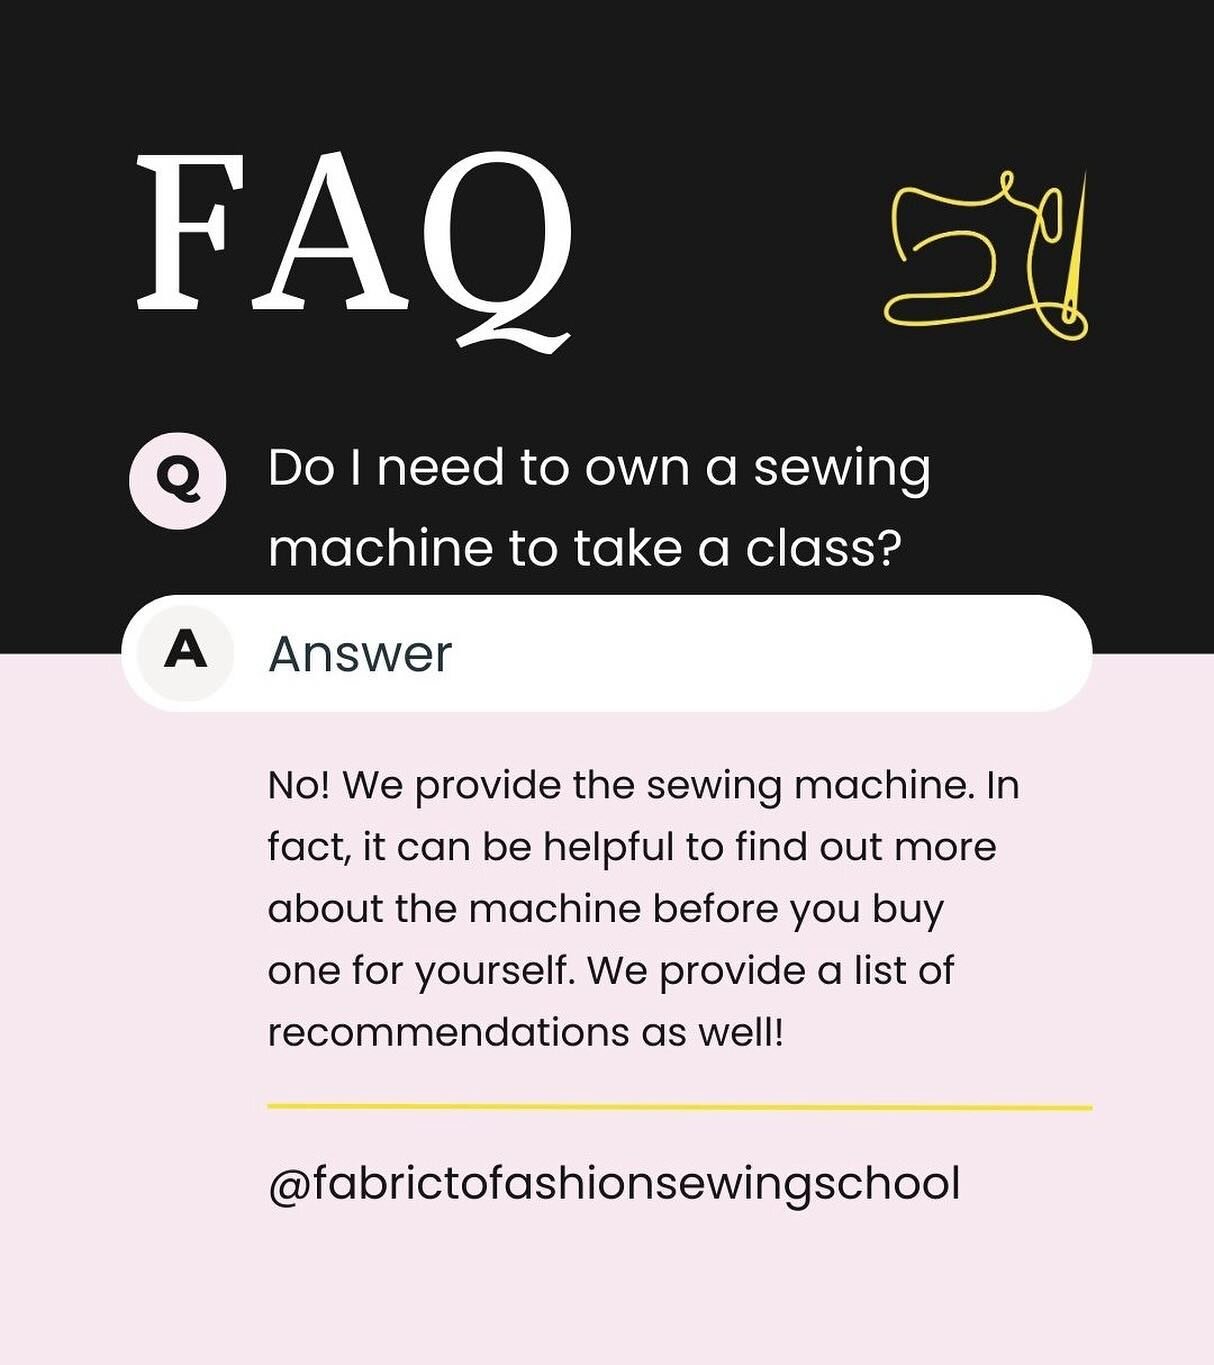 One of our most commonly asked questions!
⠀⠀⠀⠀⠀⠀⠀⠀⠀
Q: Do I need to own a machine to take a class?
A: No! We provide the sewing machine. 🙌🏼 In fact, it can be helpful to find out more about the machine before you buy one for yourself. We provide a 